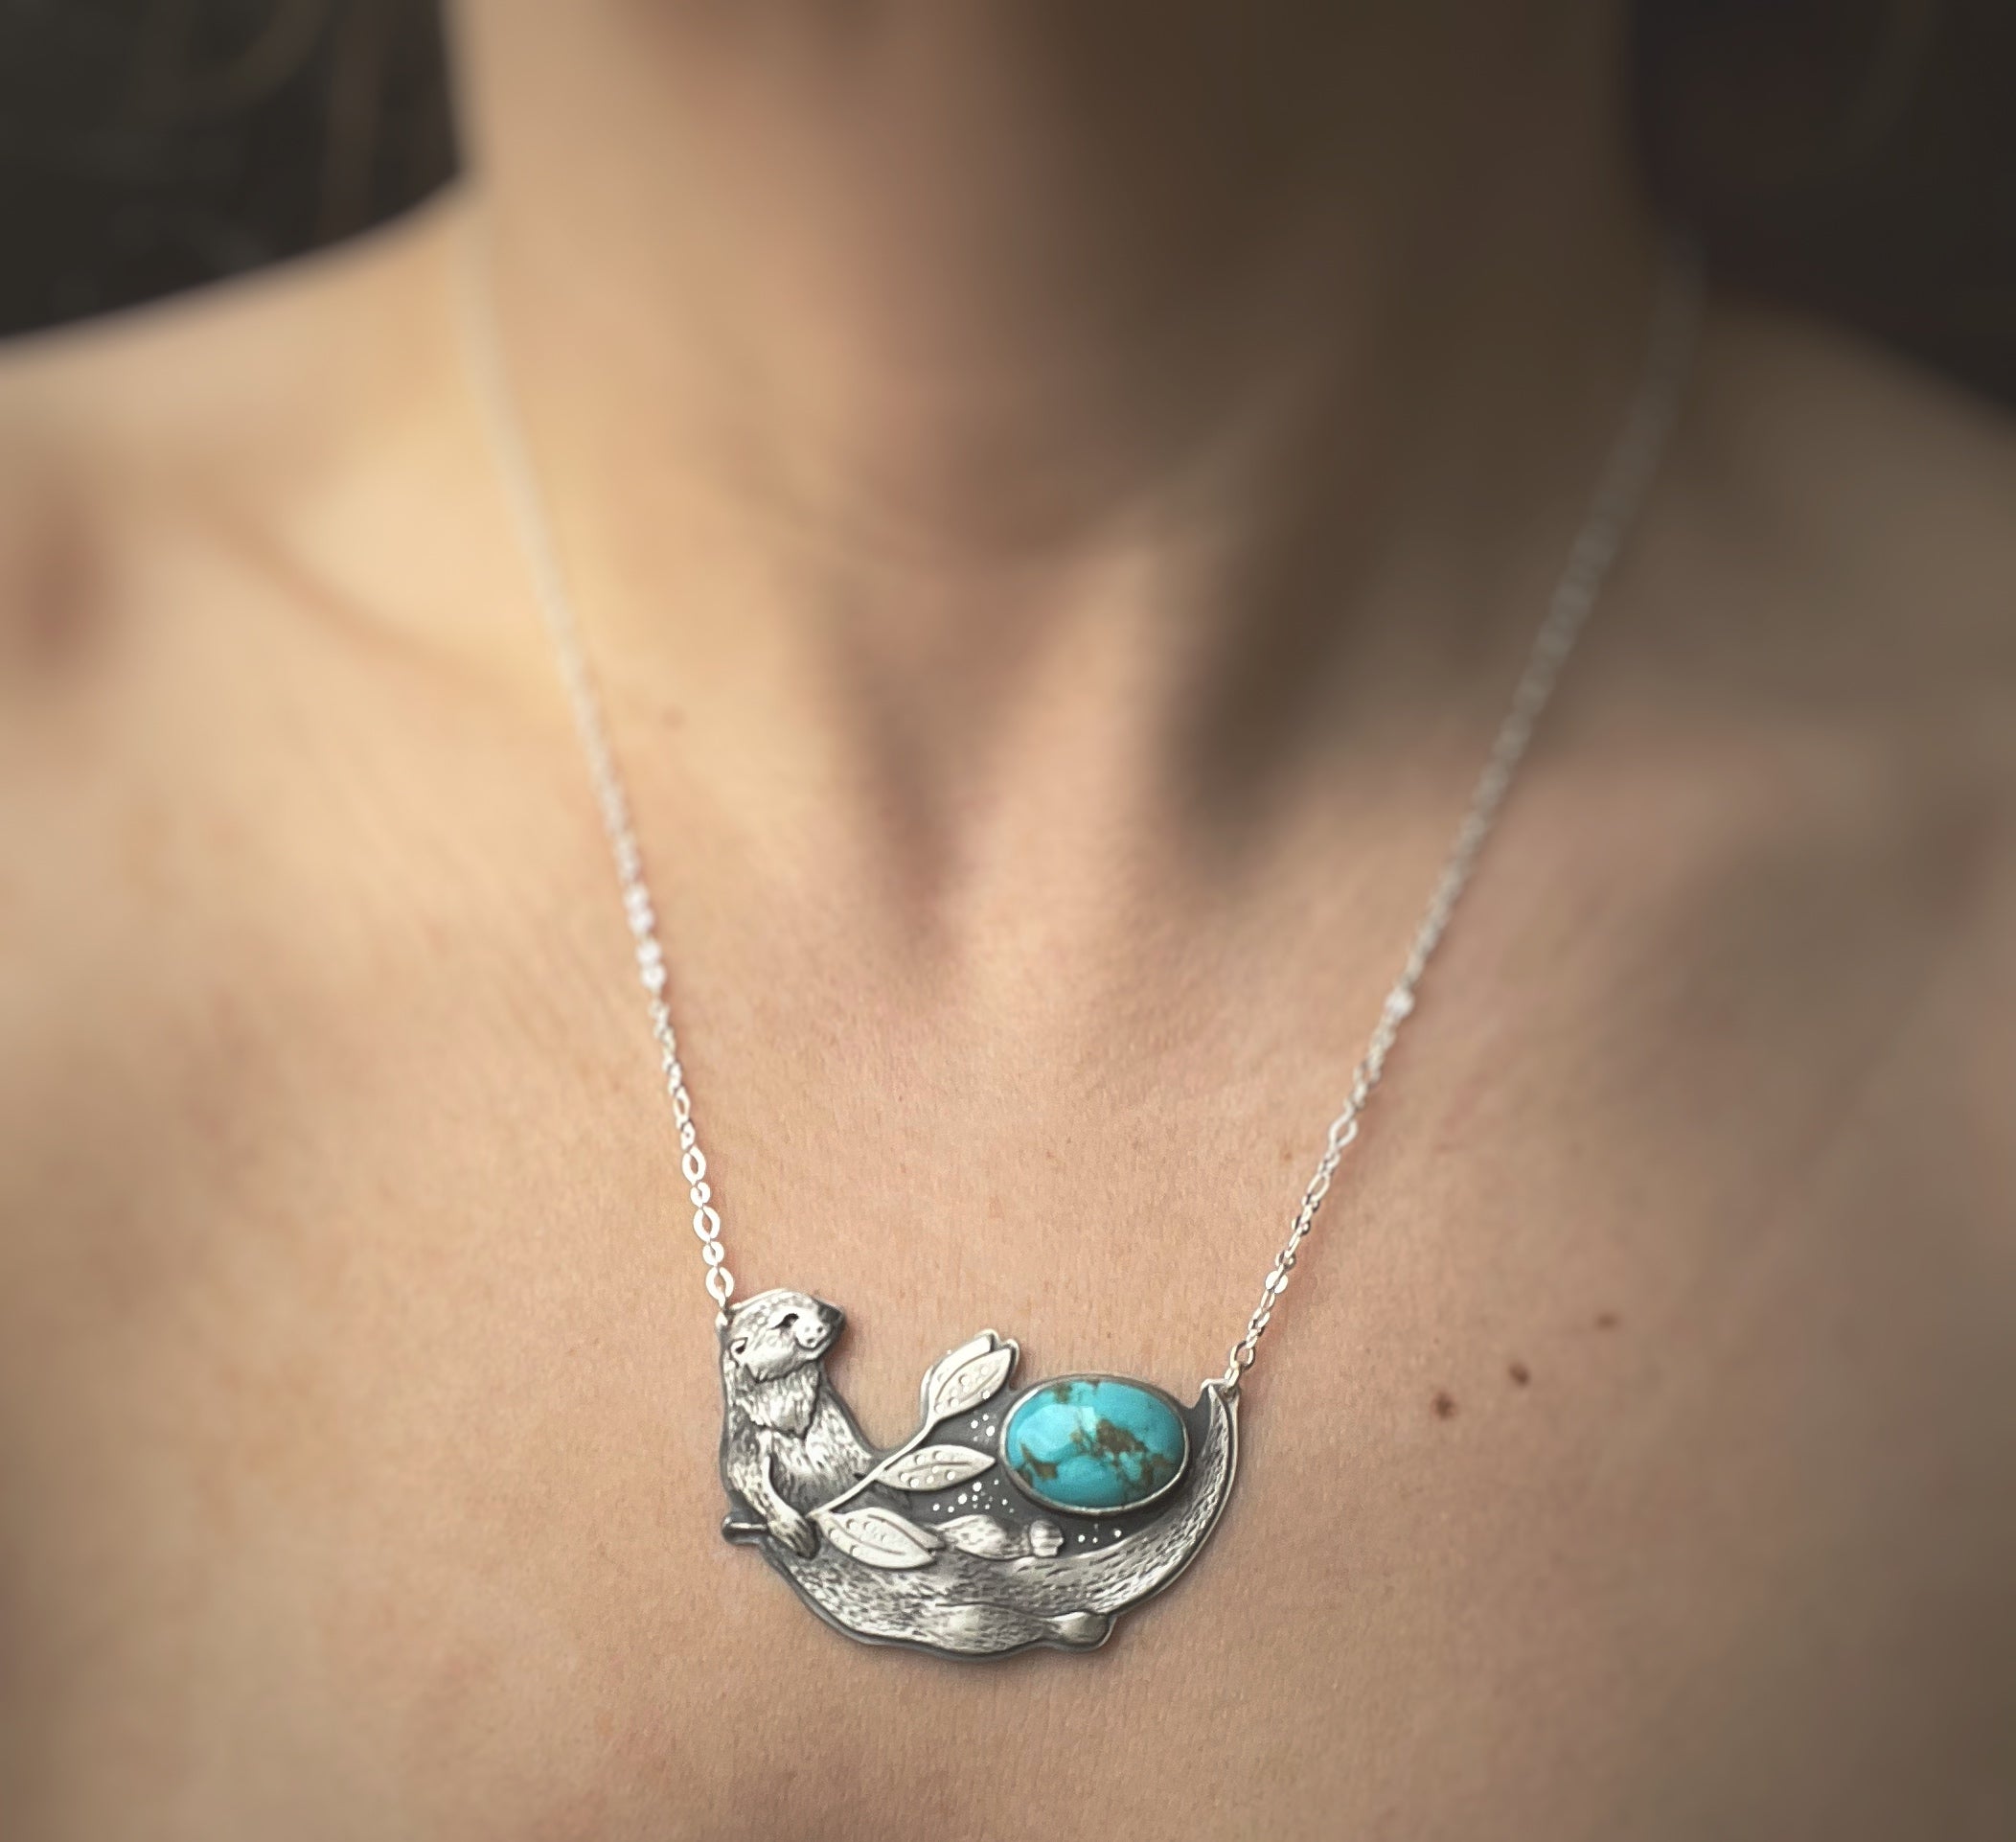 The Happy Otter & Turquoise Necklace